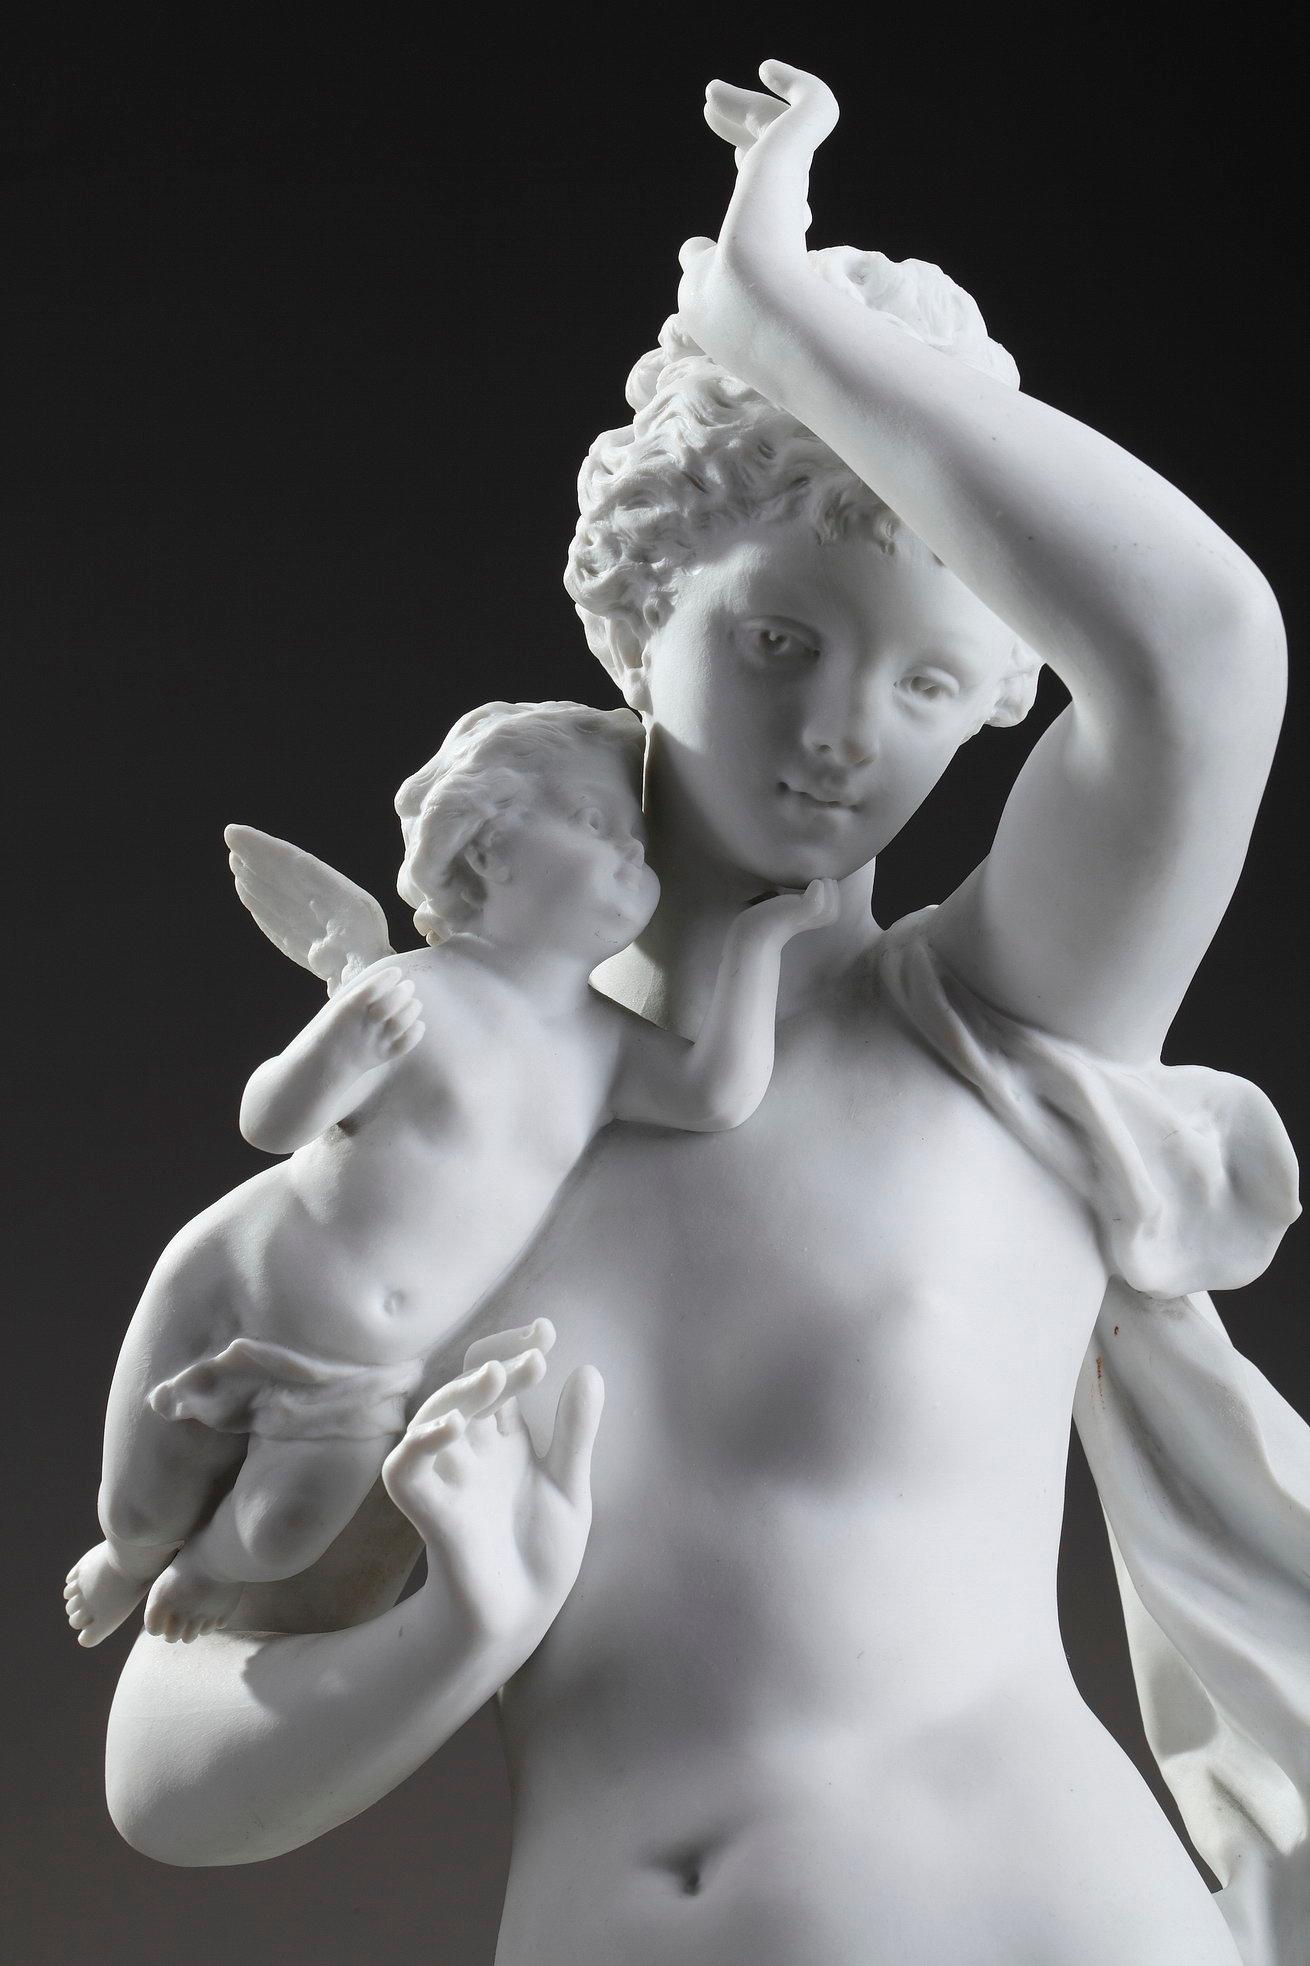 Art Nouveau bisque, porcelain, figurine featuring Venus in the company of two Cupids by Ernest Rancoulet (French, 1870-1915). One of them holds a cornucopia, and the other one touches her face tenderly. Venus leans against a column adorned with